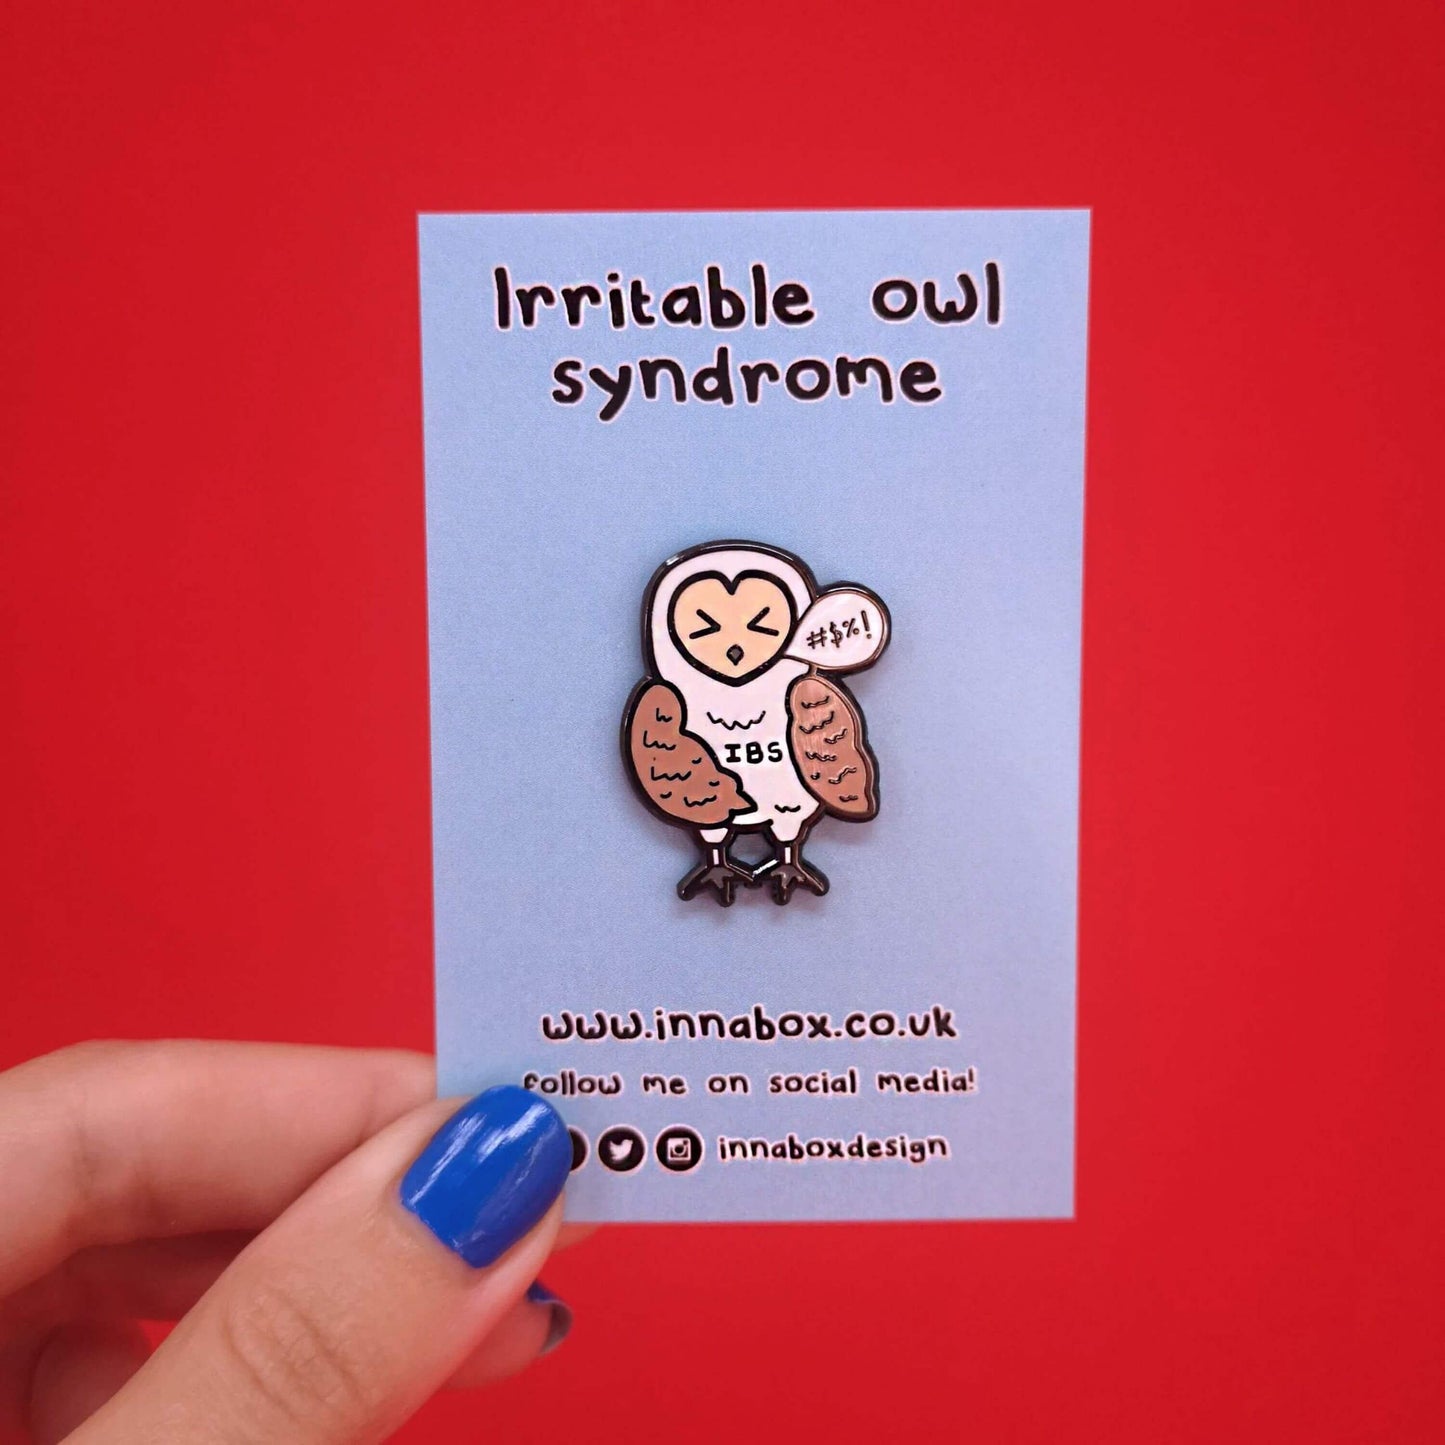 Irritable Owl Syndrome Enamel Pin - Irritable bowel syndrome (IBS) on backing card in front of a red background. The enamel pin is of a barn owl with a sweary text speech bubble and has its eyes shut with the letters IBS written on its belly. Hand drawn design to raise awareness for Irritable bowel syndrome (IBS)